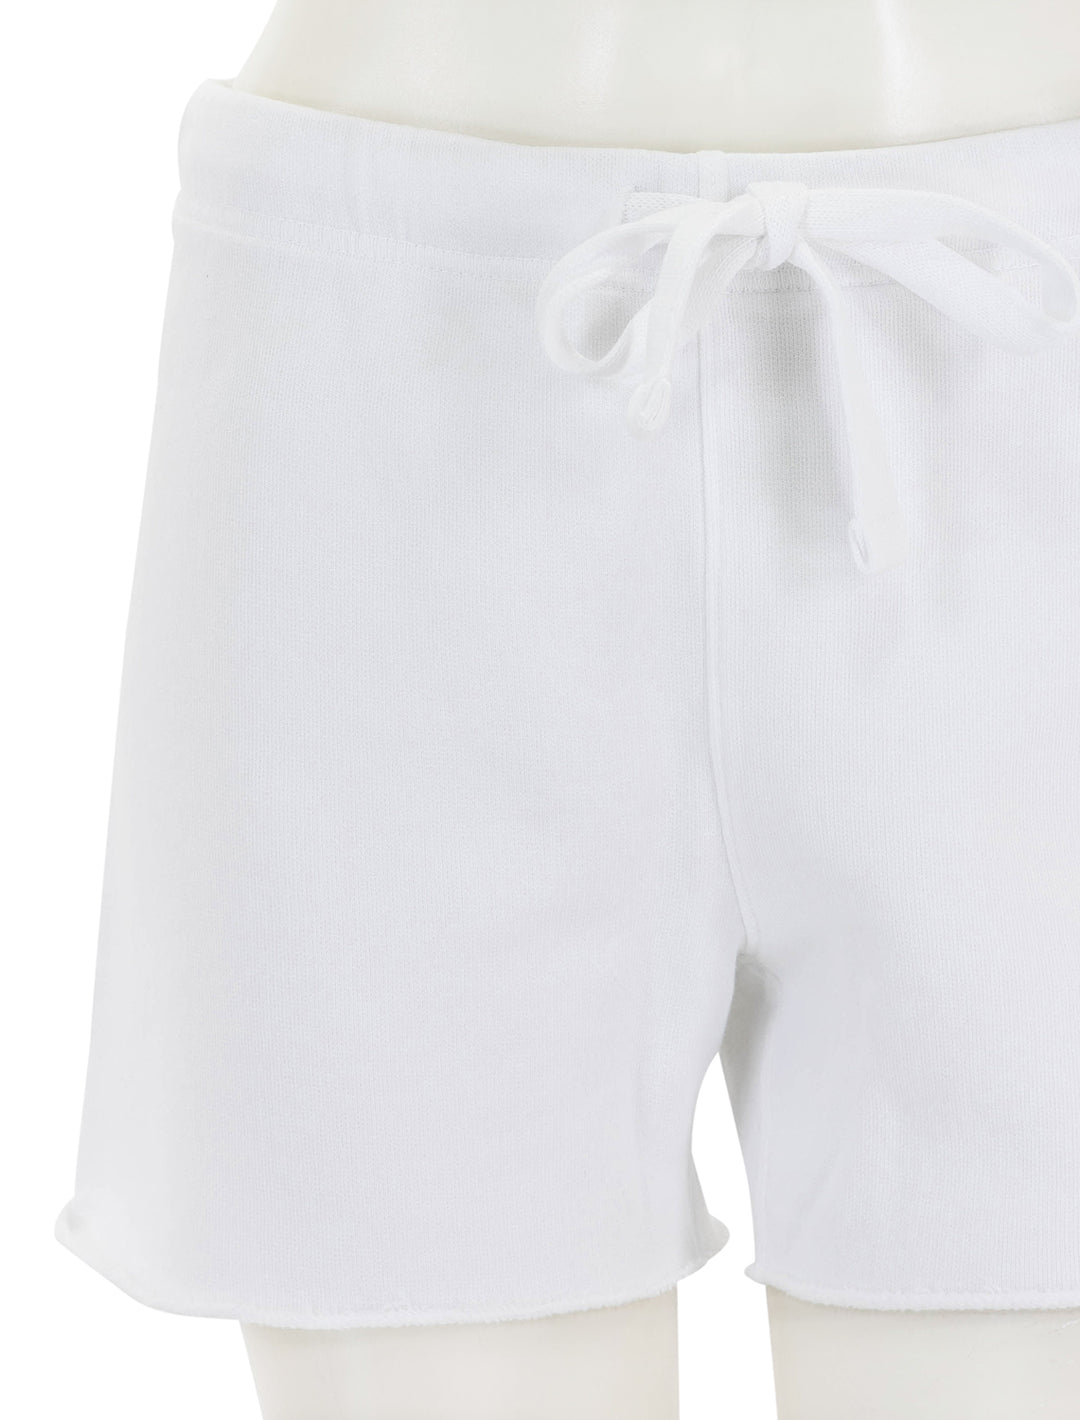 Close-up view of Frank & Eileen's pearl sweatshorts in white.